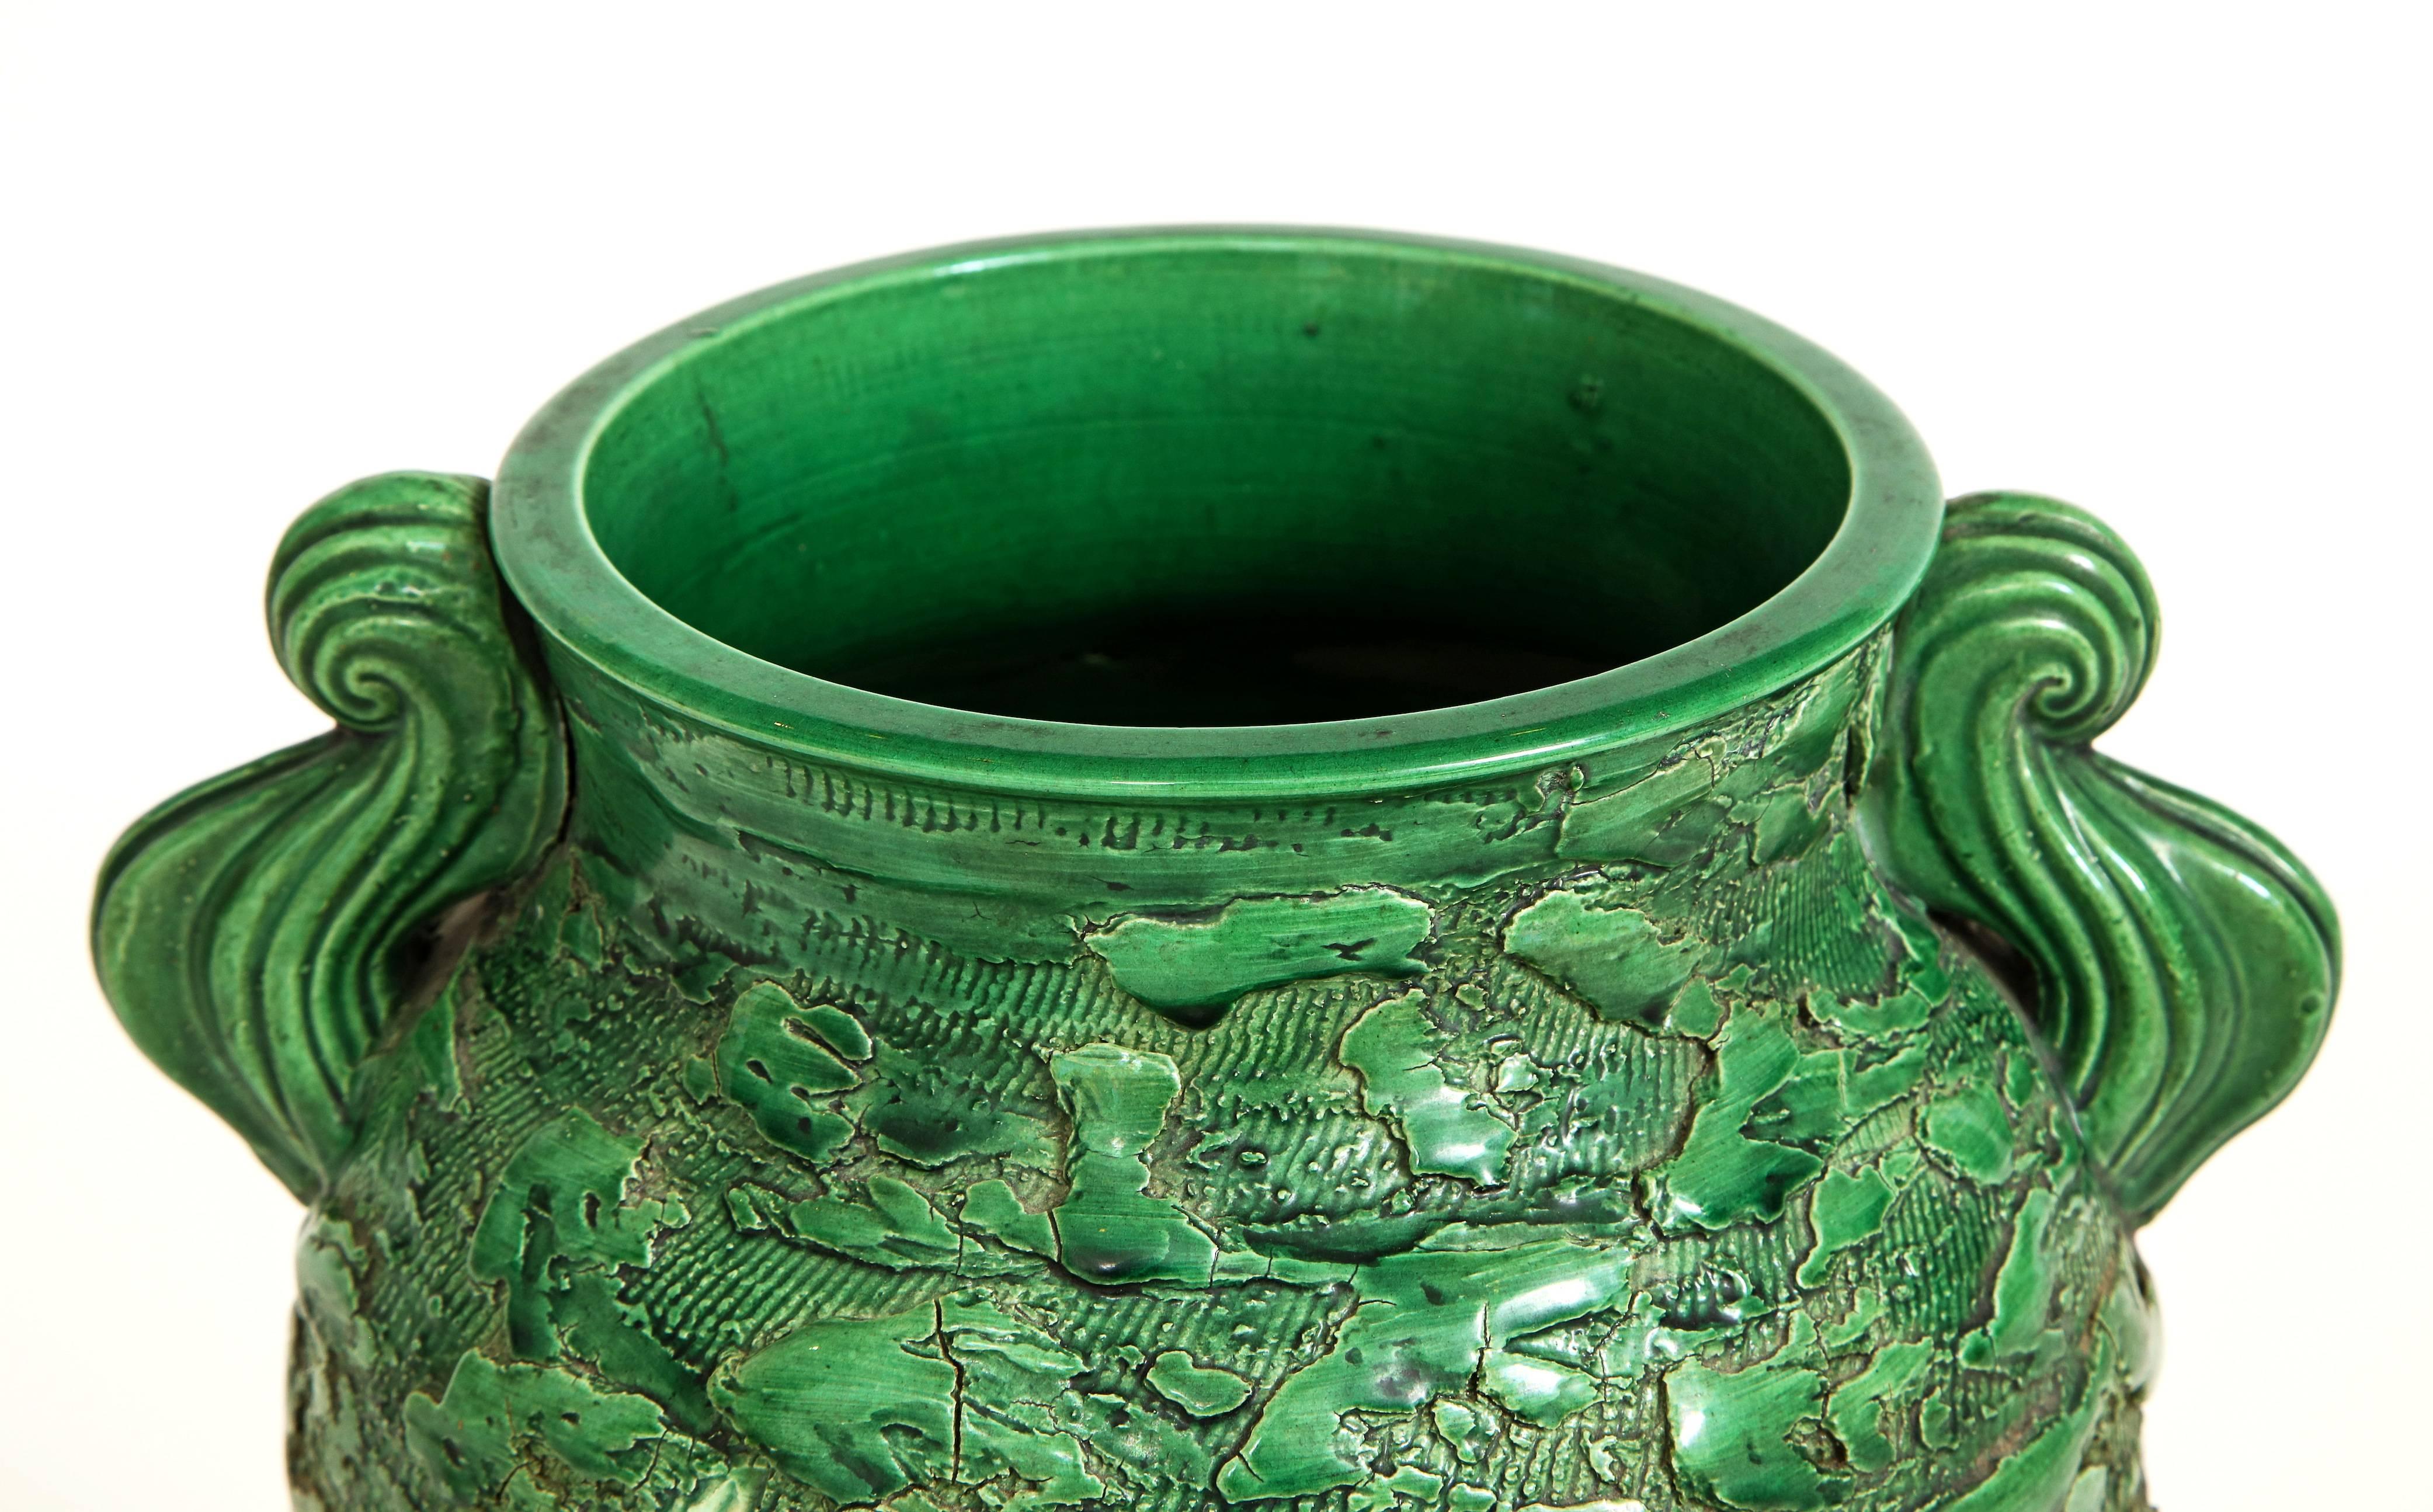 Stunning and large emerald green hand card ceramic Awaji vase with iris design. This dynamic vase shows the artistry of the Japanese during the 1920s. Magnificent scale and a vibrant mix of carved green with blue irises creates this majestic vase